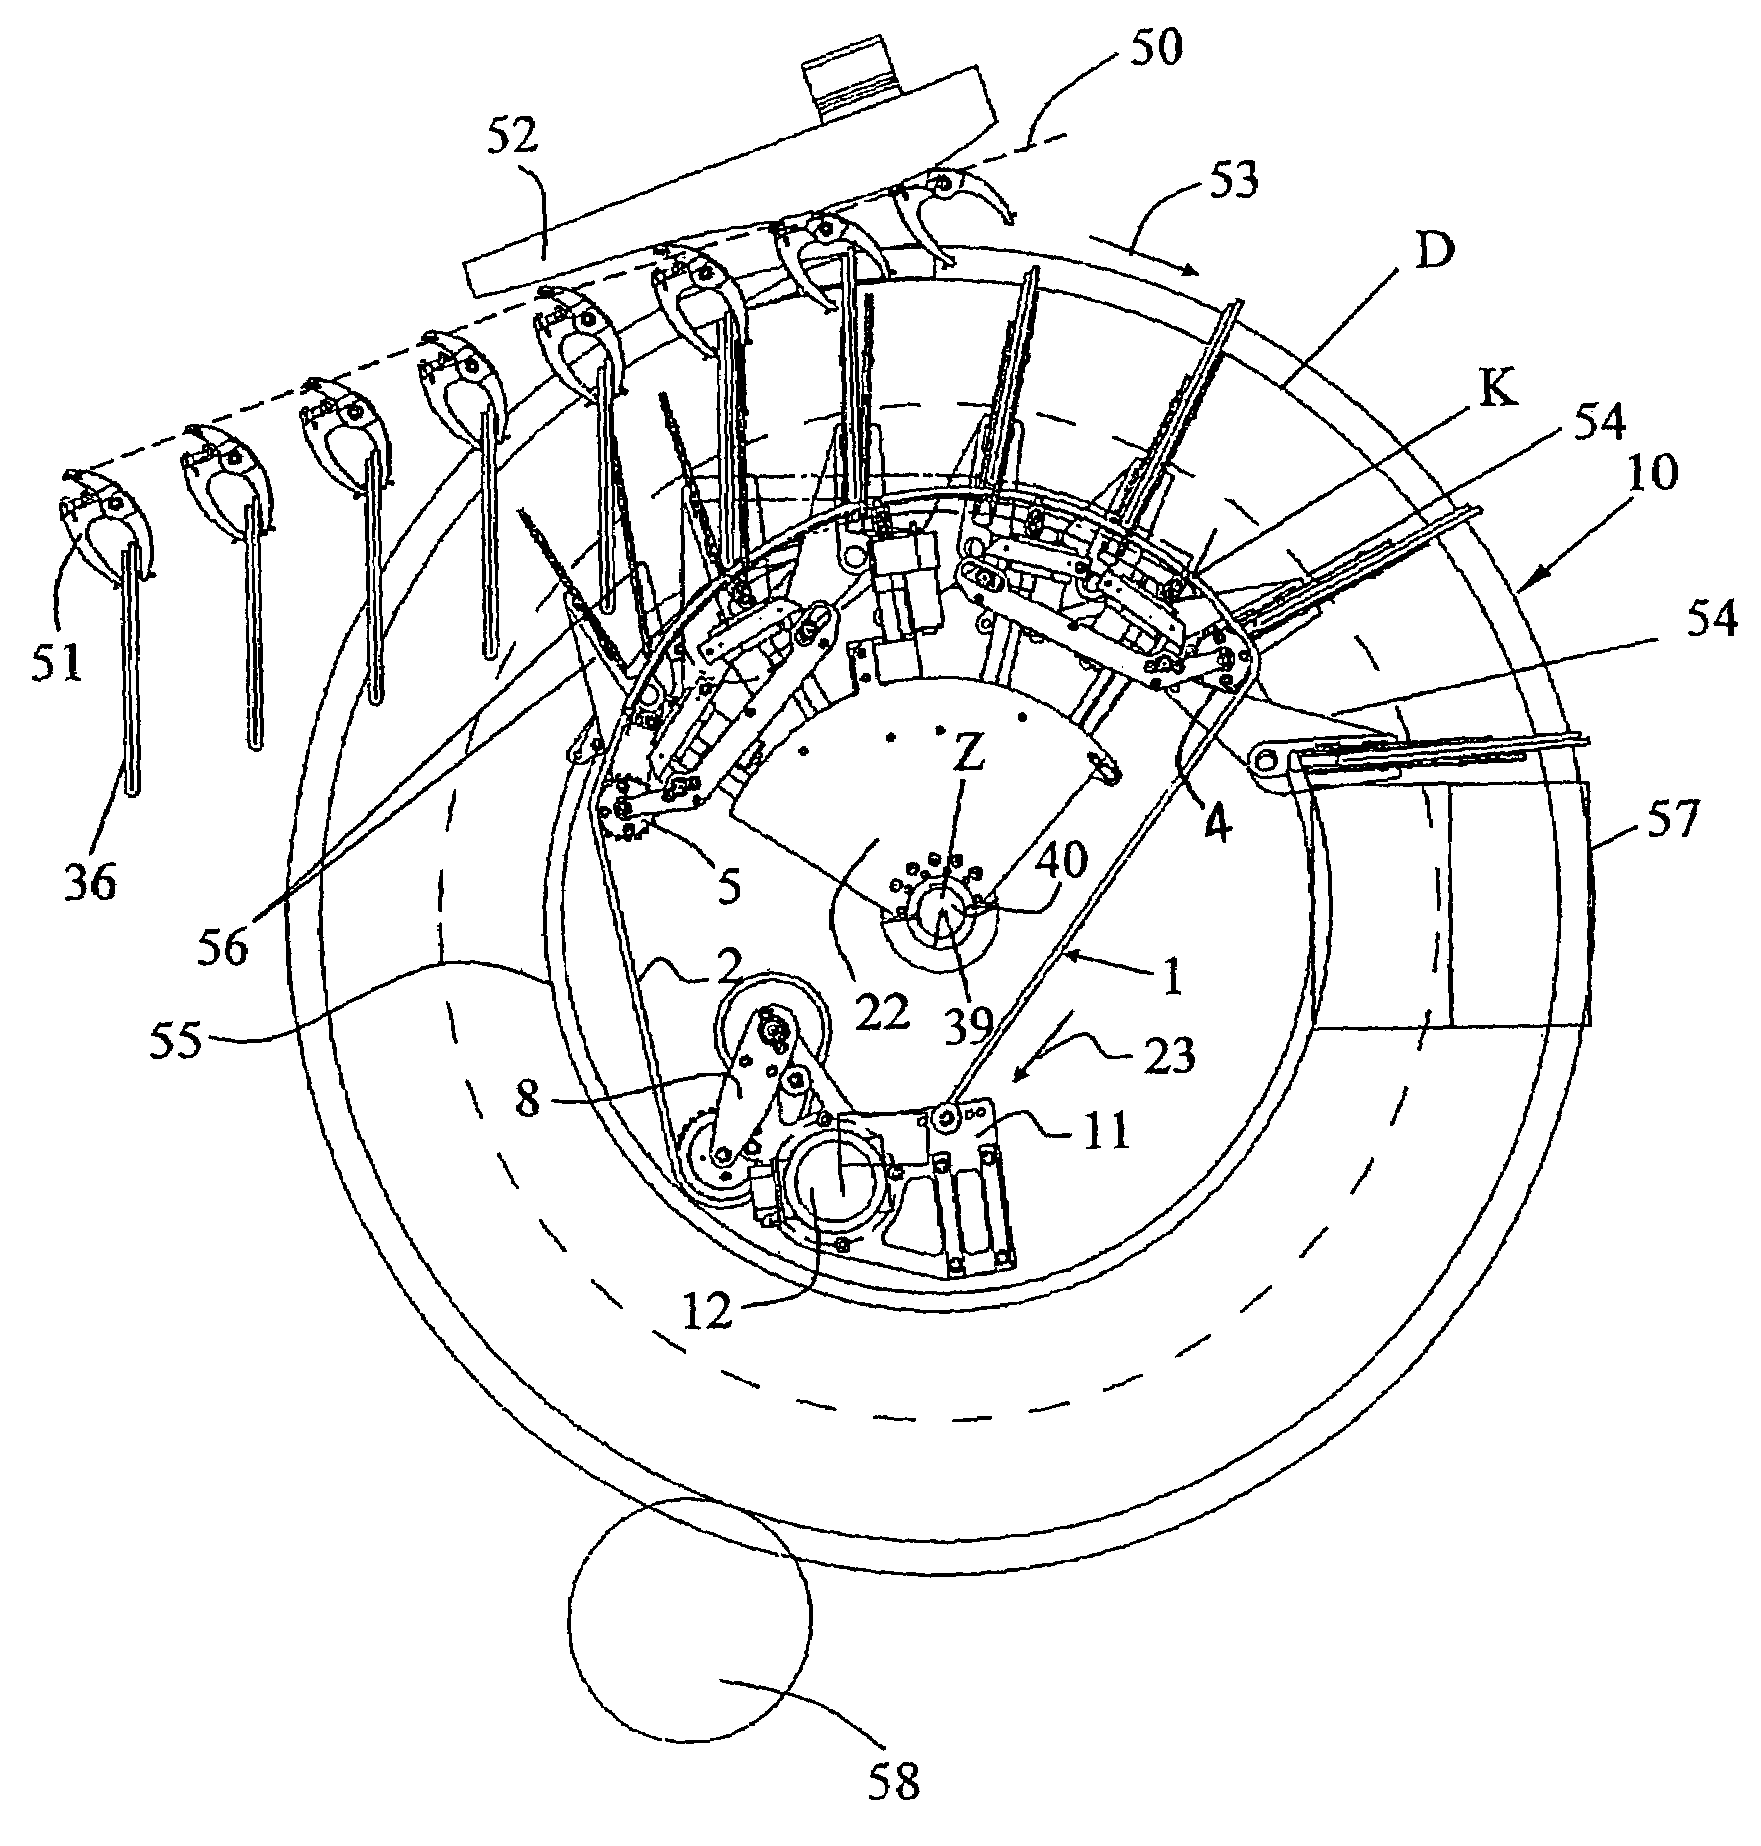 Apparatus for trimming print products